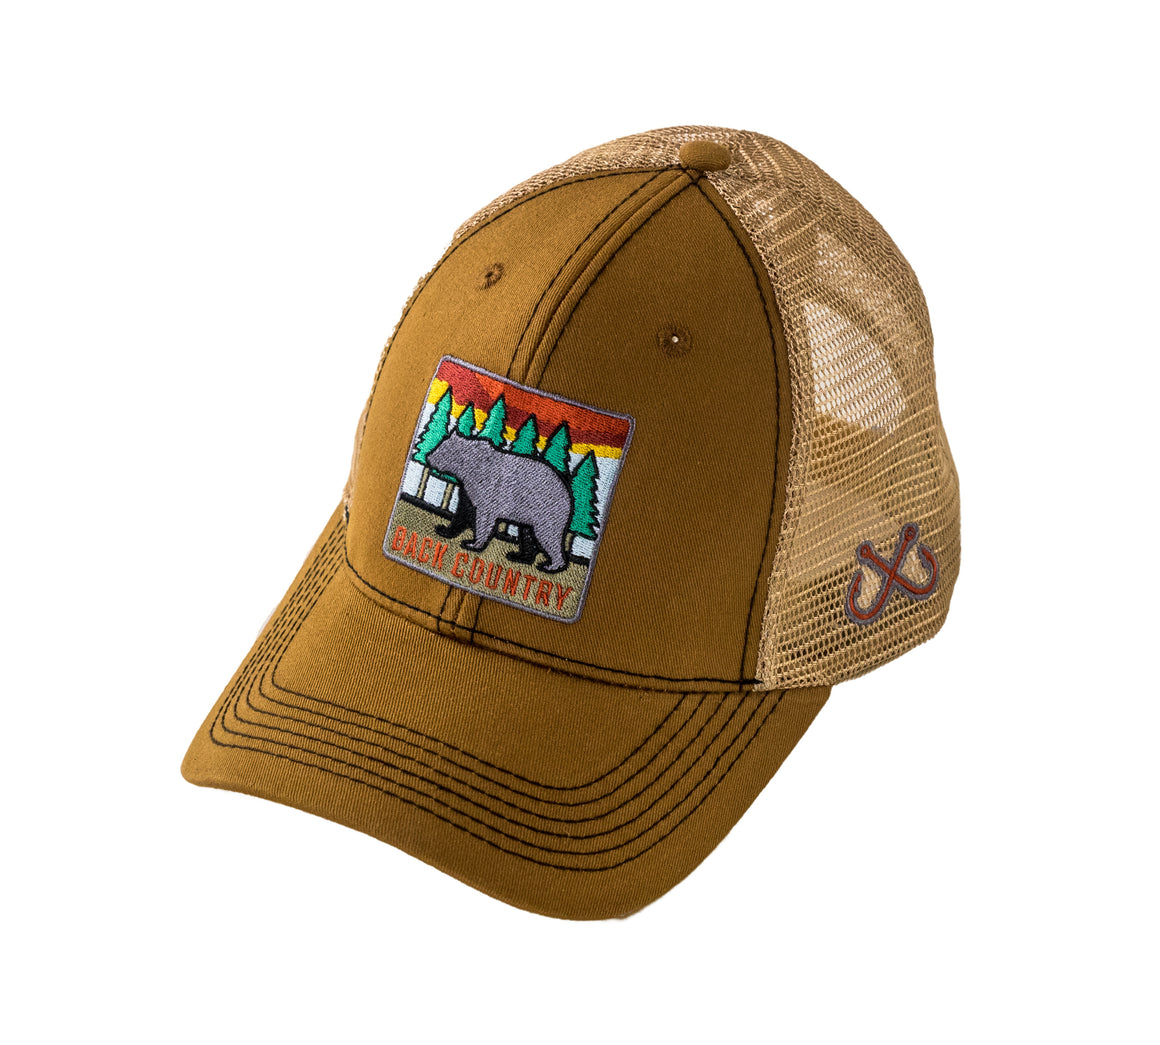 Youth - Trucker Hat - Back Country Bear - Camel/Tan